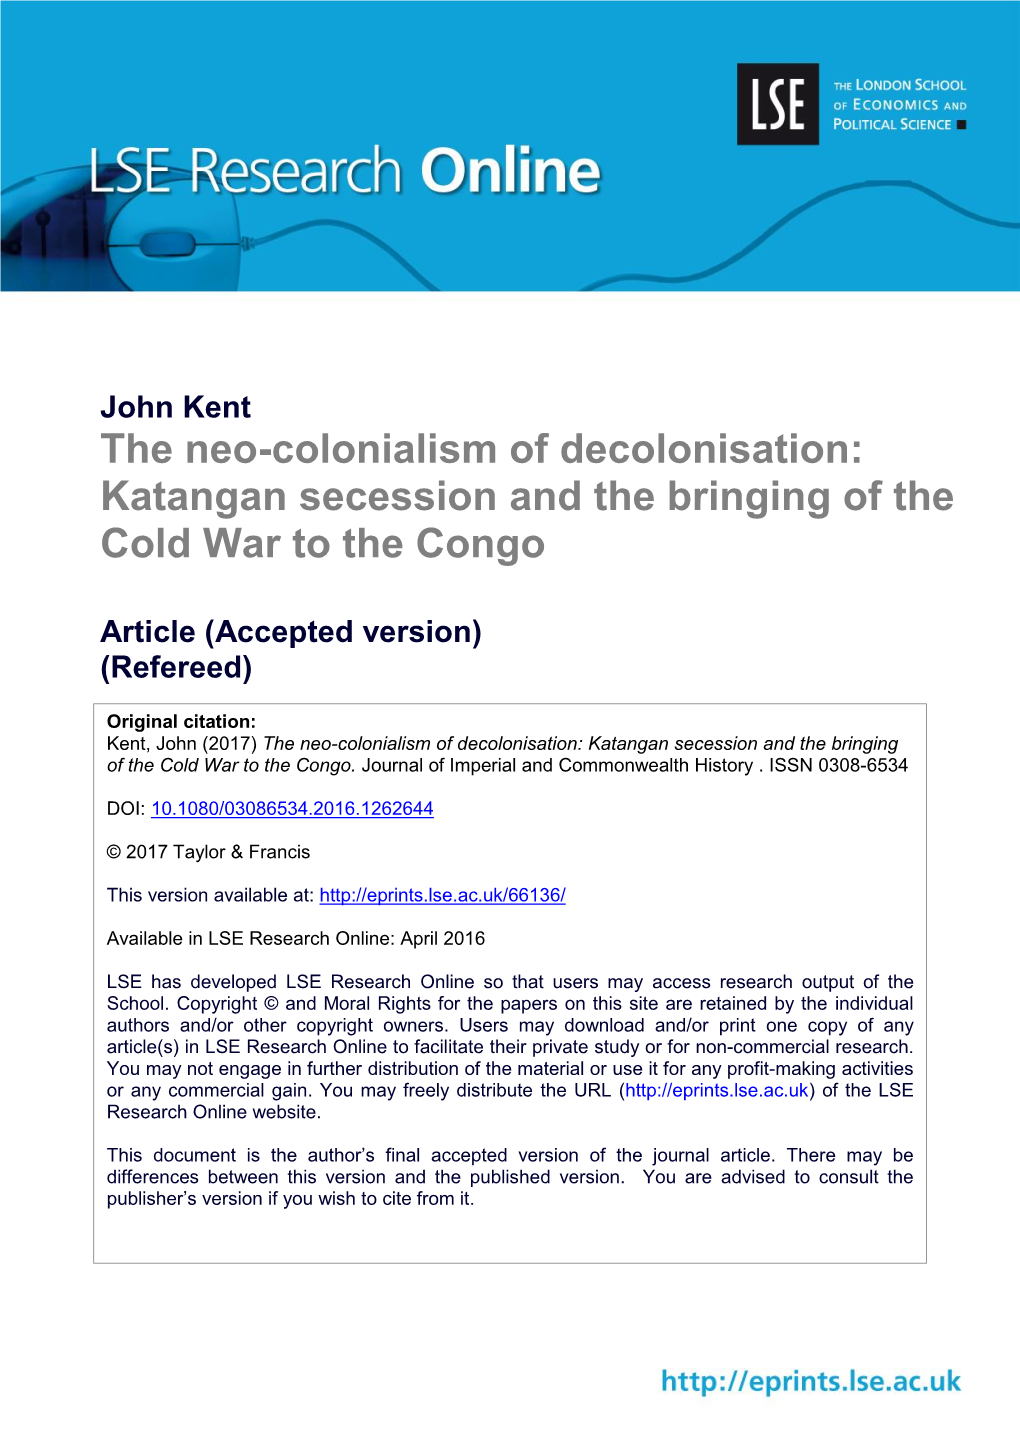 The Neo-Colonialism of Decolonisation: Katangan Secession and the Bringing of the Cold War to the Congo